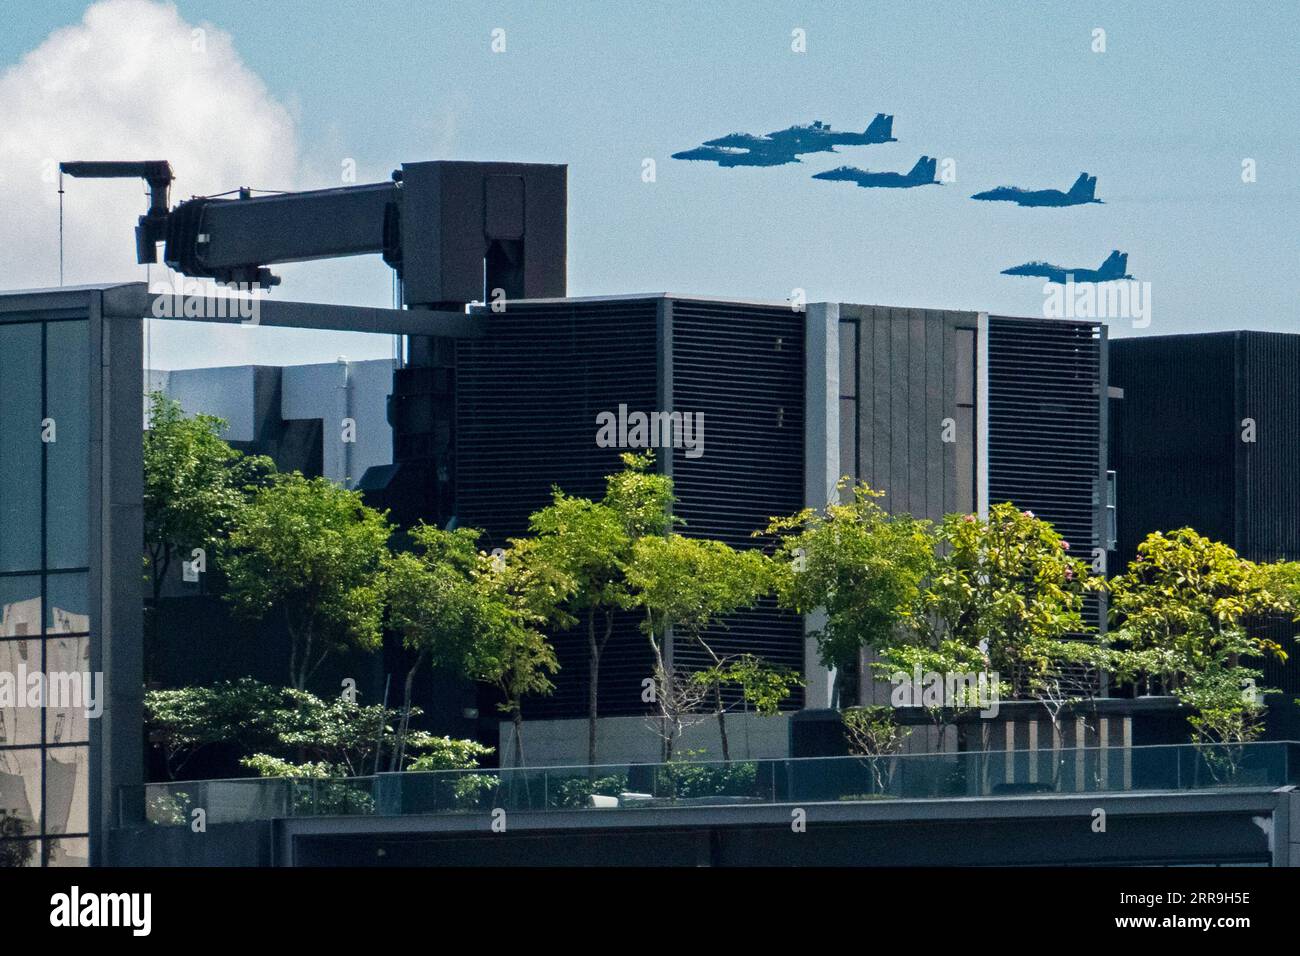 210617 -- SINGAPORE, June 17, 2021 -- Aircrafts fly in formation as part of the rehearsal for the upcoming National Day Parade flying display in Singapore on June 17, 2021. Singapore celebrates its independence day every year on Aug. 9. Photo by /Xinhua SINGAPORE-NATIONAL DAY PARADE-REHEARSAL ThenxChihxWey PUBLICATIONxNOTxINxCHN Stock Photo